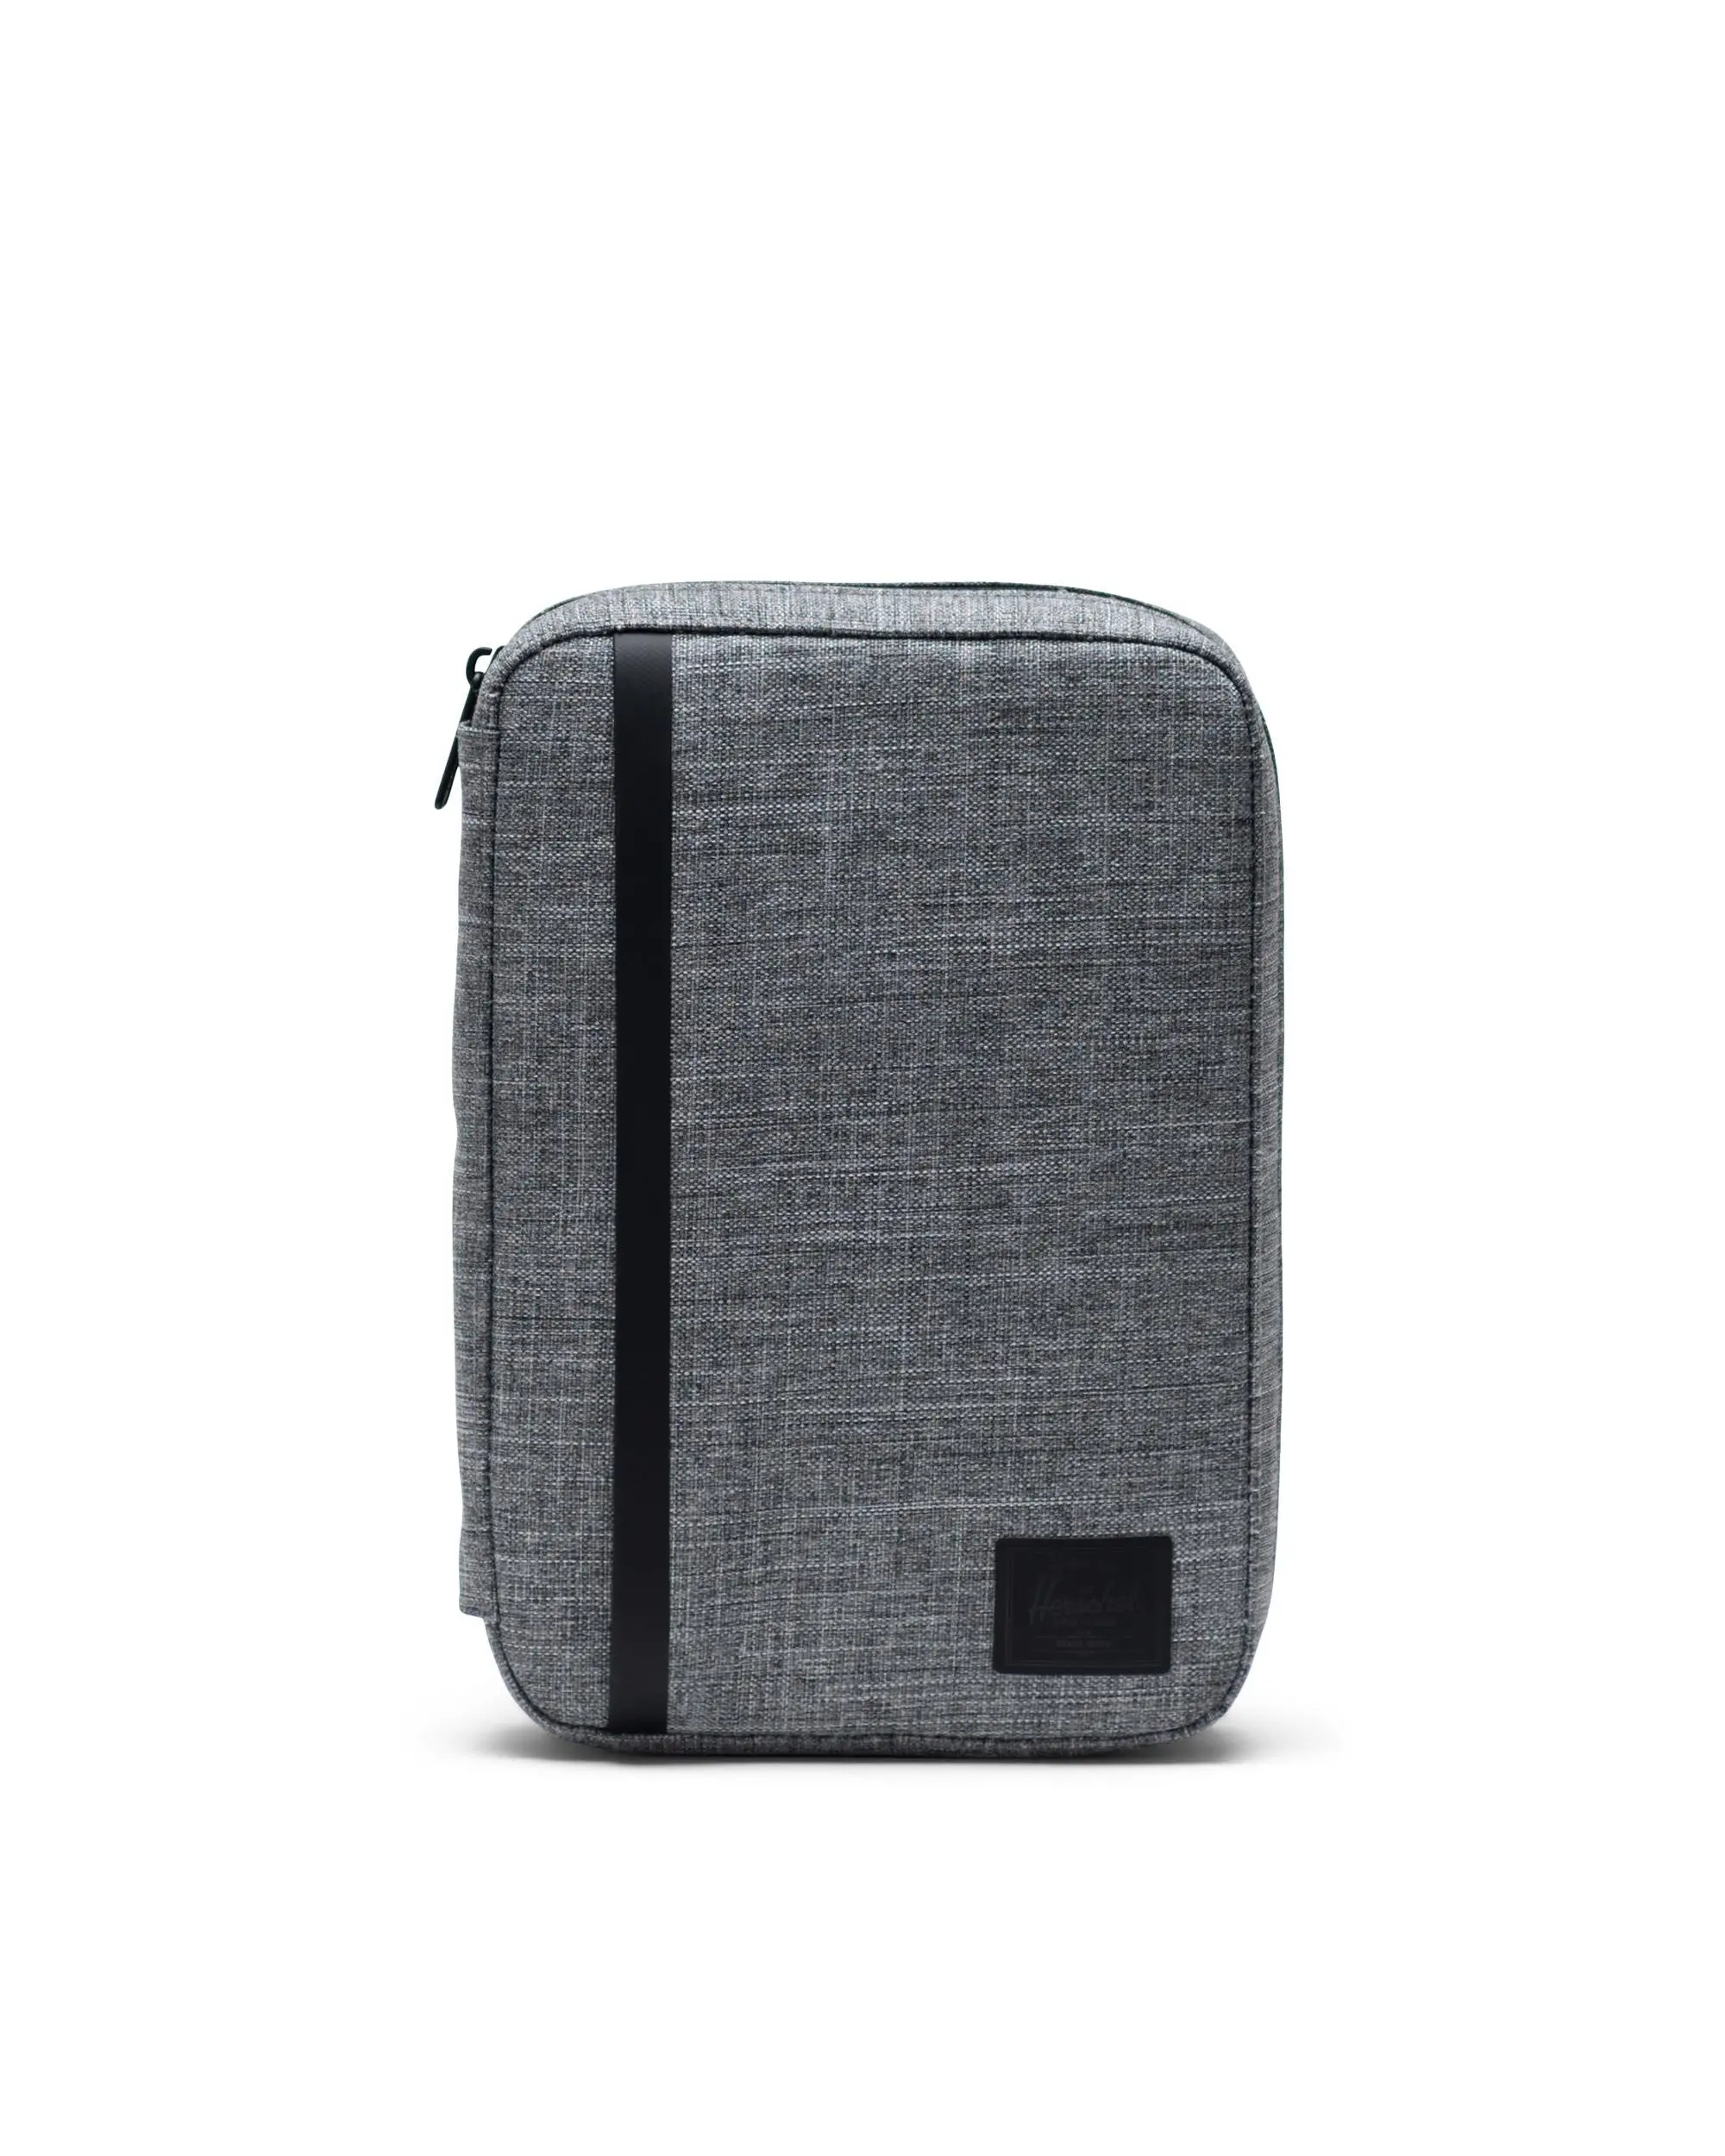 Herschel Supply Company Tablets & Accessories for Electronics